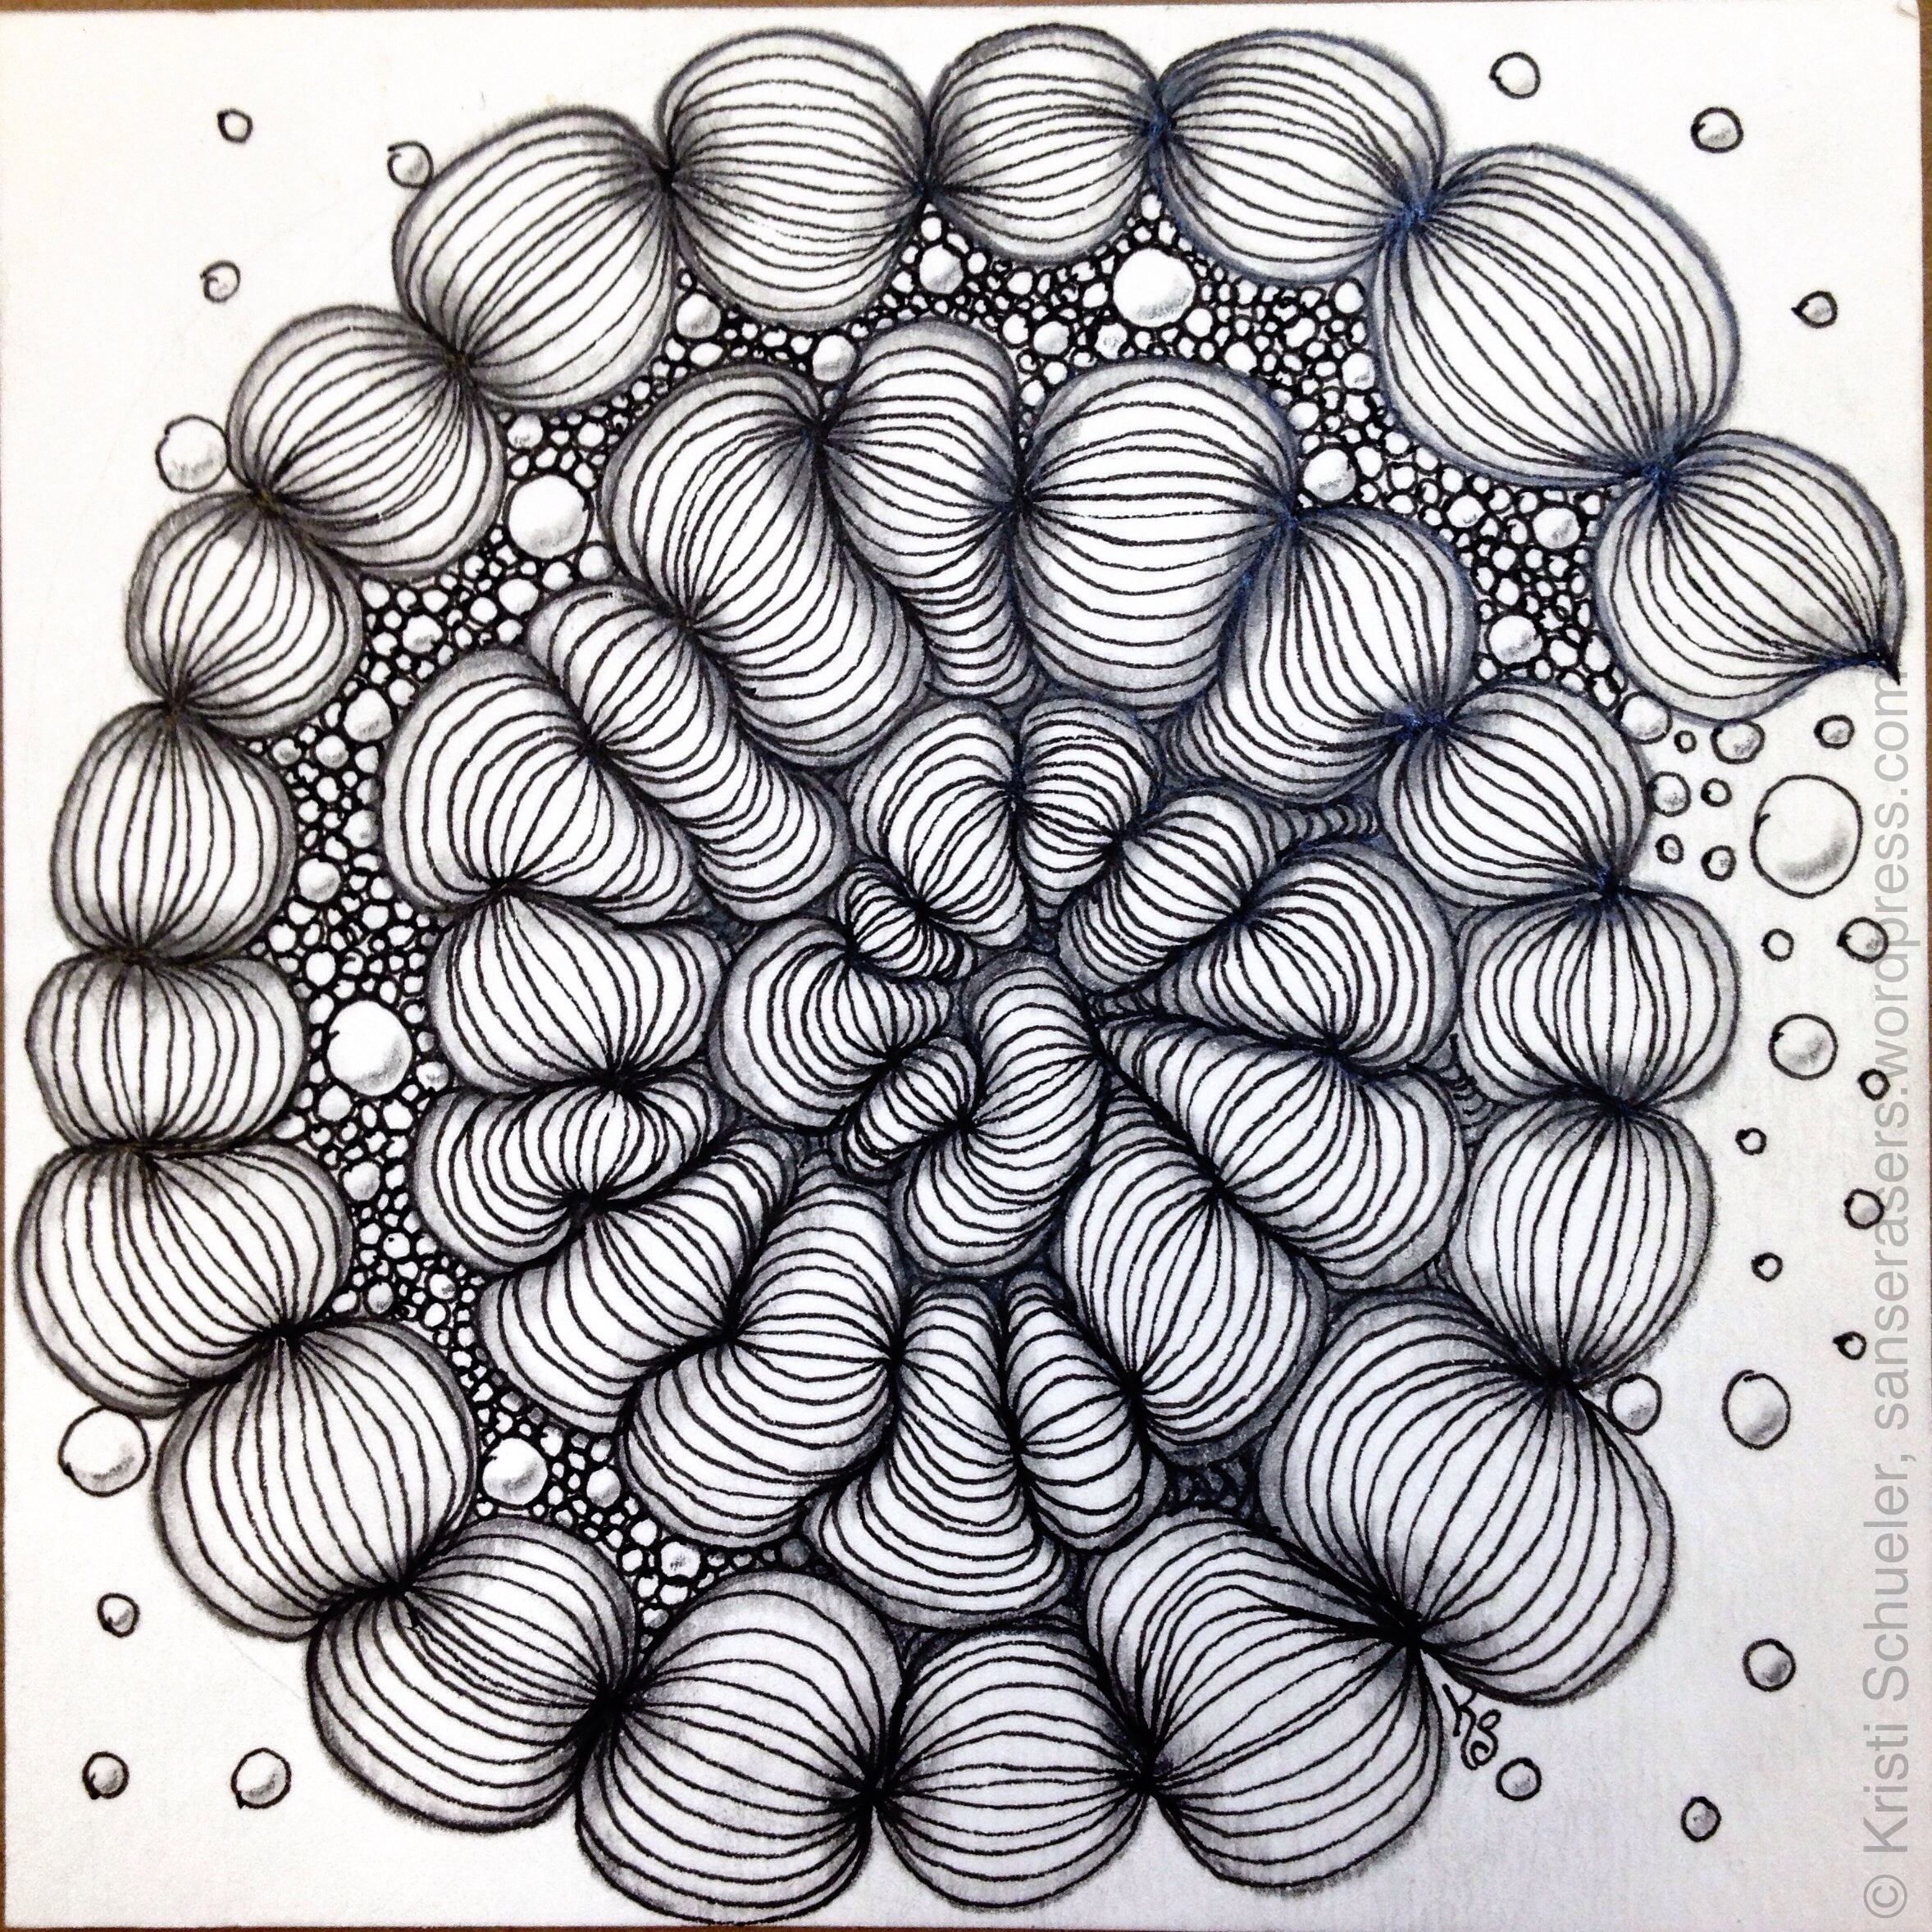 A Mr. E and Tipple spiral string zentangle.